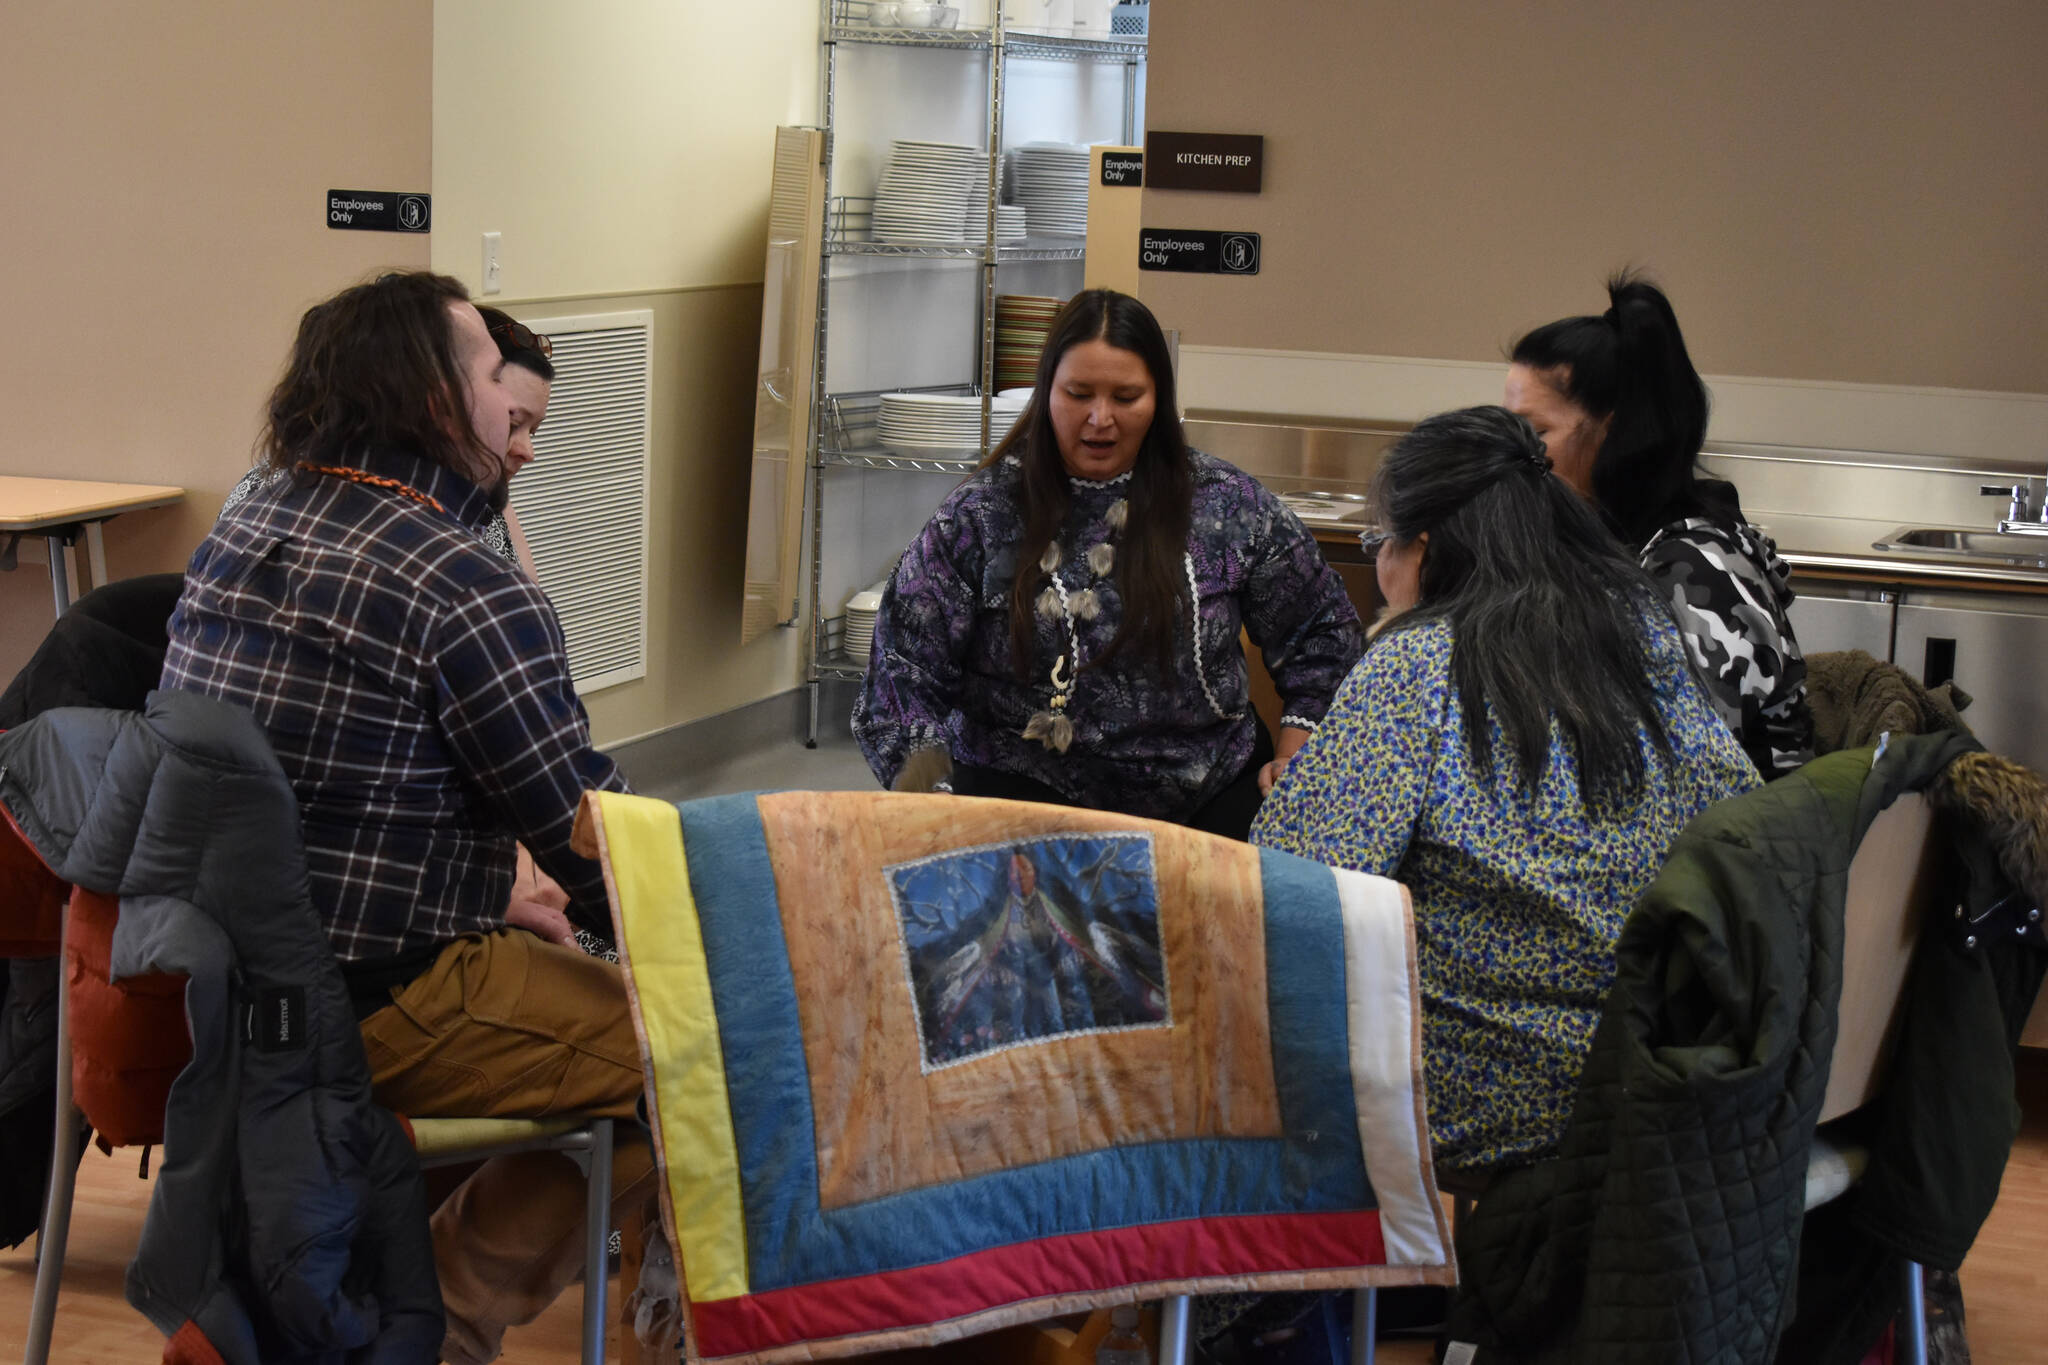 The Heartbeat of Mother Earth drummers perform during a celebration of Elizabeth Peratrovich Day at the Kenaitze Indian Tribe’s Tyotkas Elder Center in Kenai, Alaska, on Thursday, Feb. 16, 2023. (Jake Dye/Peninsula Clarion)